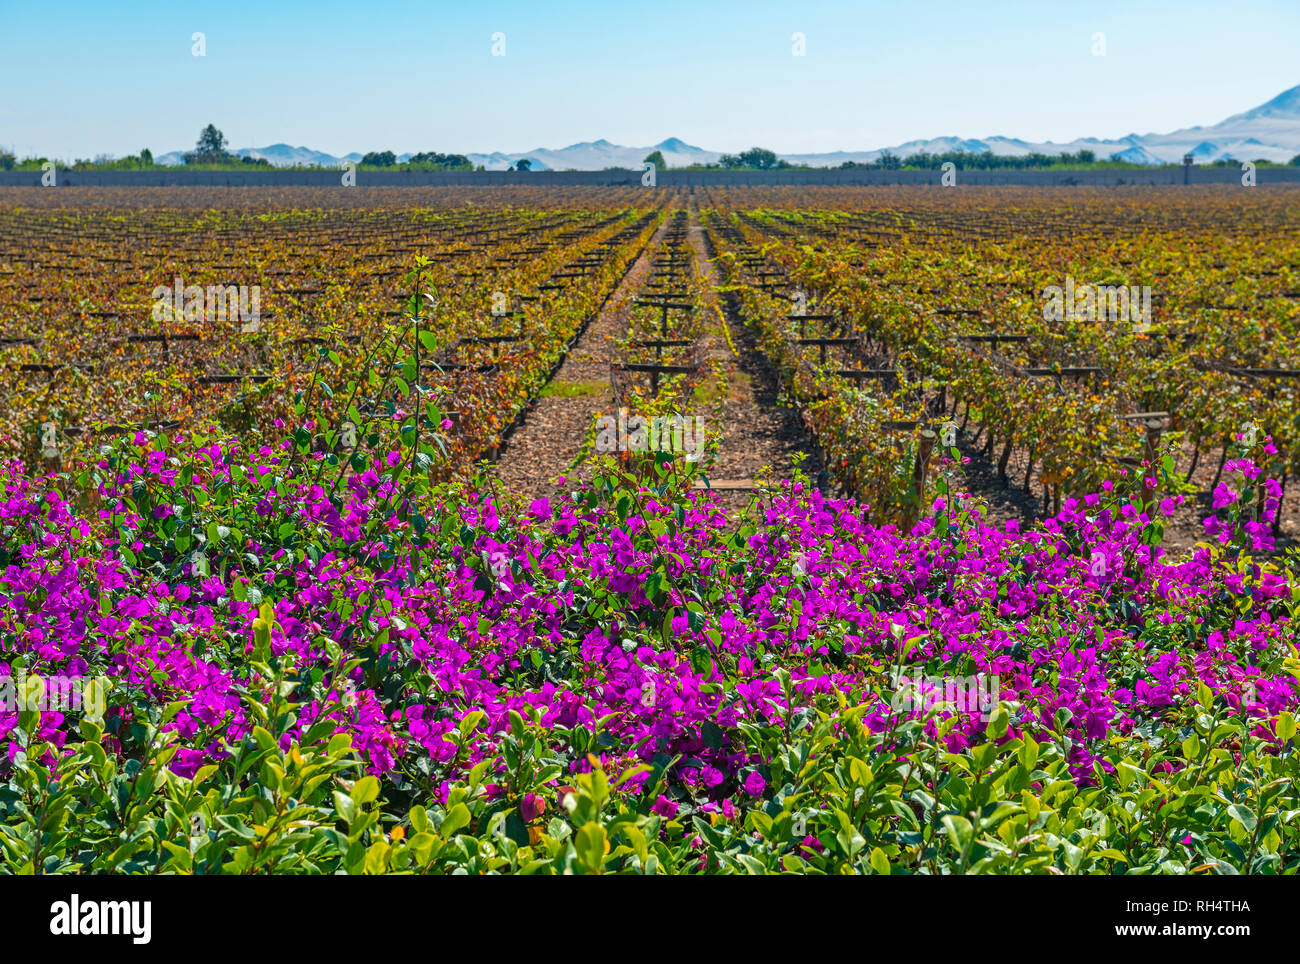 Colourful fuchsia or magenta bougainvillea flowers and vines in a winery of Ica used for the production of quality wines, pisco and champagne, Peru. Stock Photo